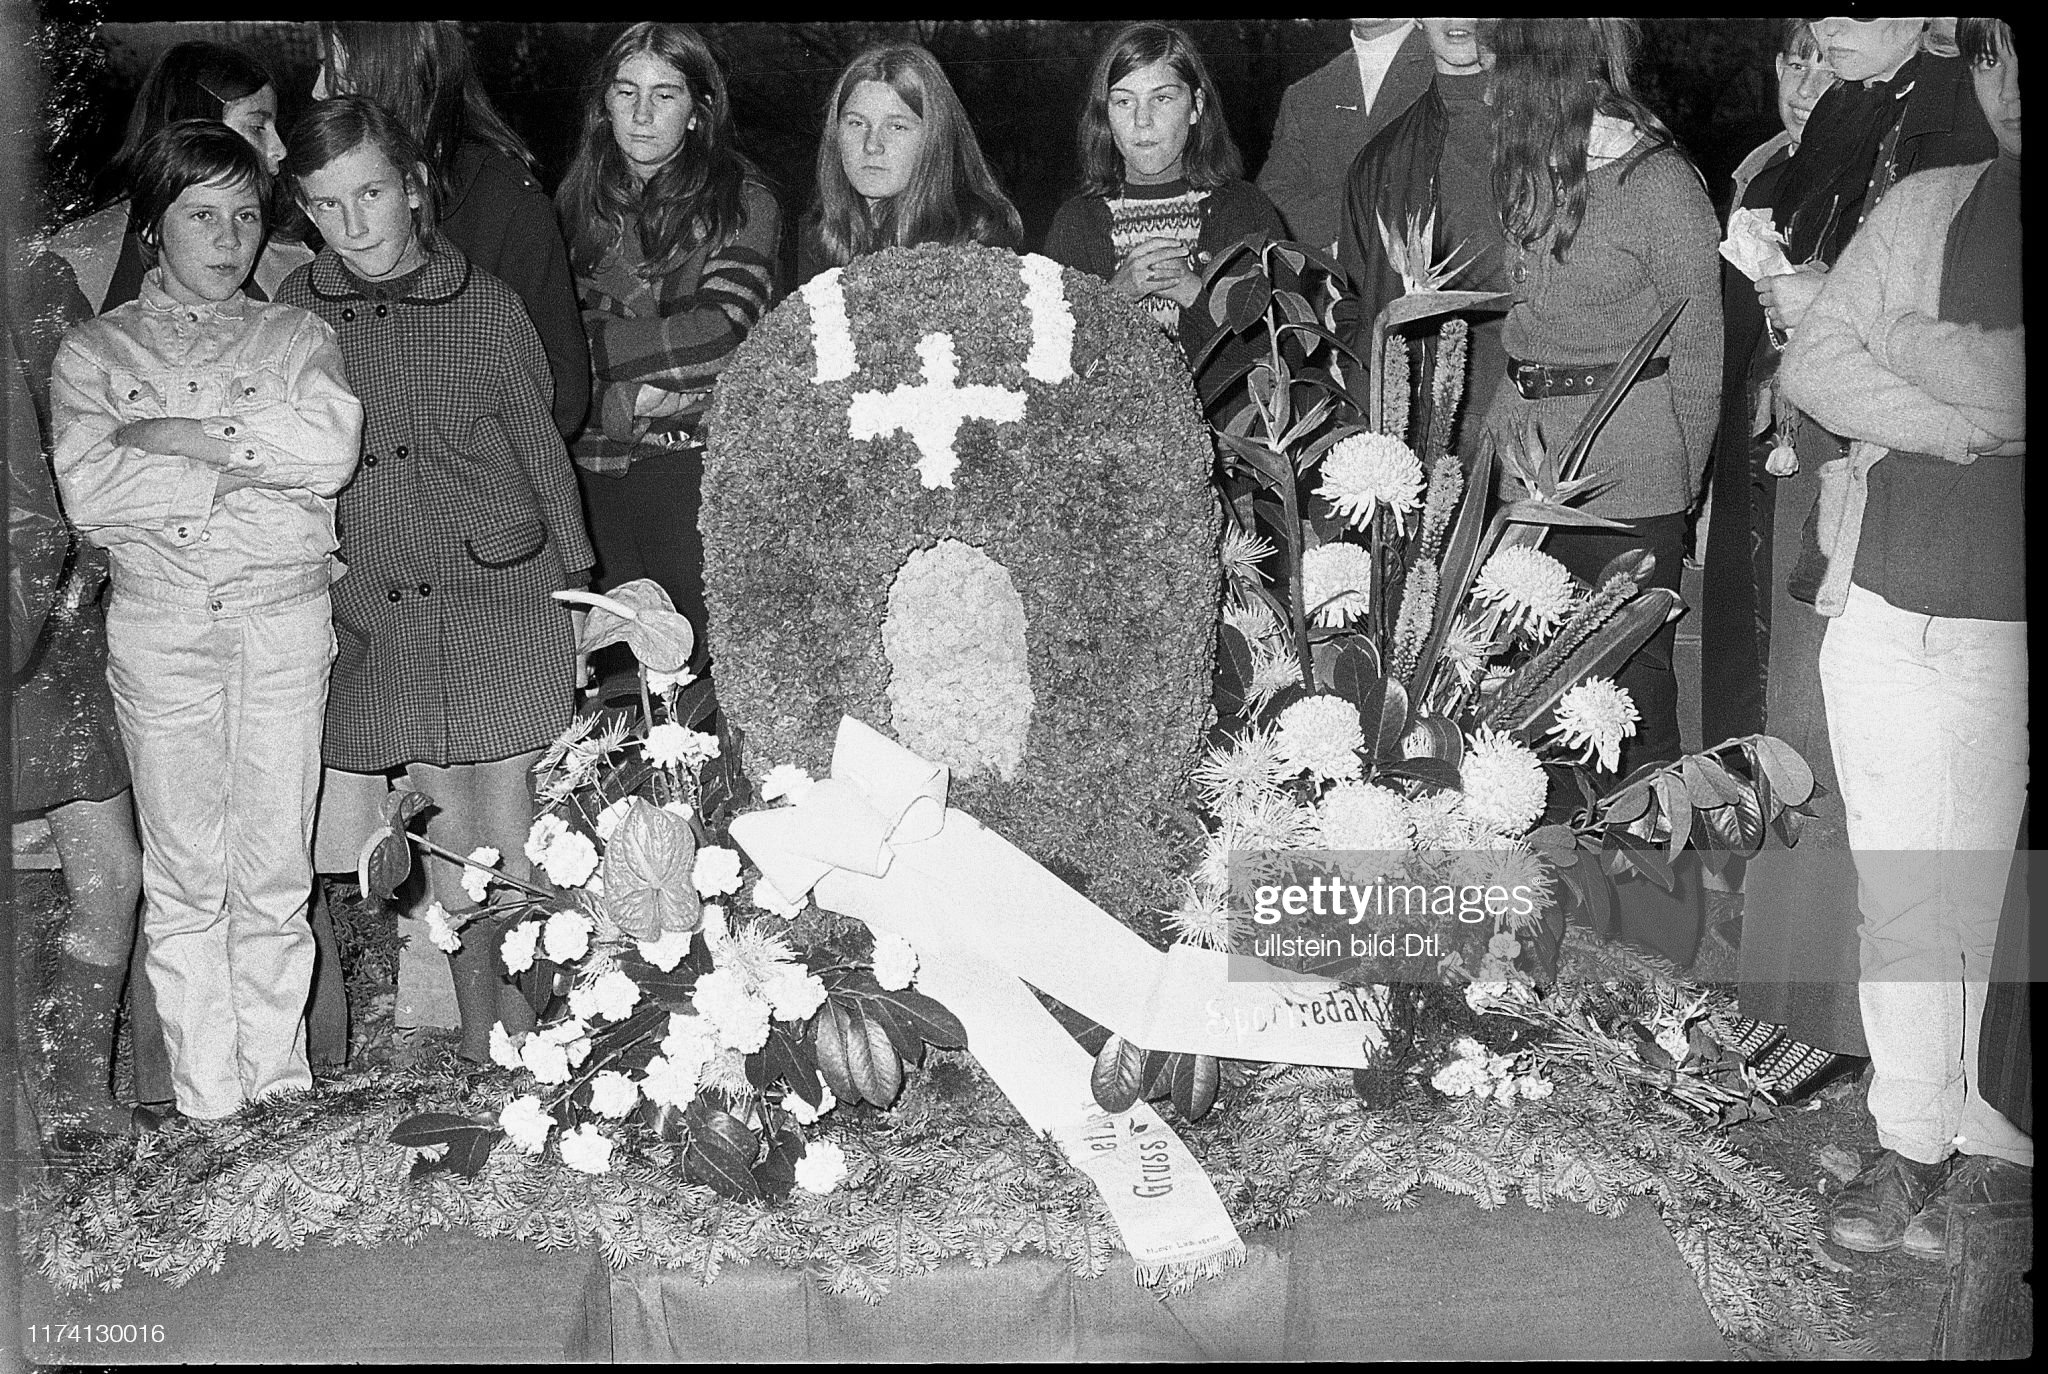 Jo Siffert's funeral, Fribourg 1971.